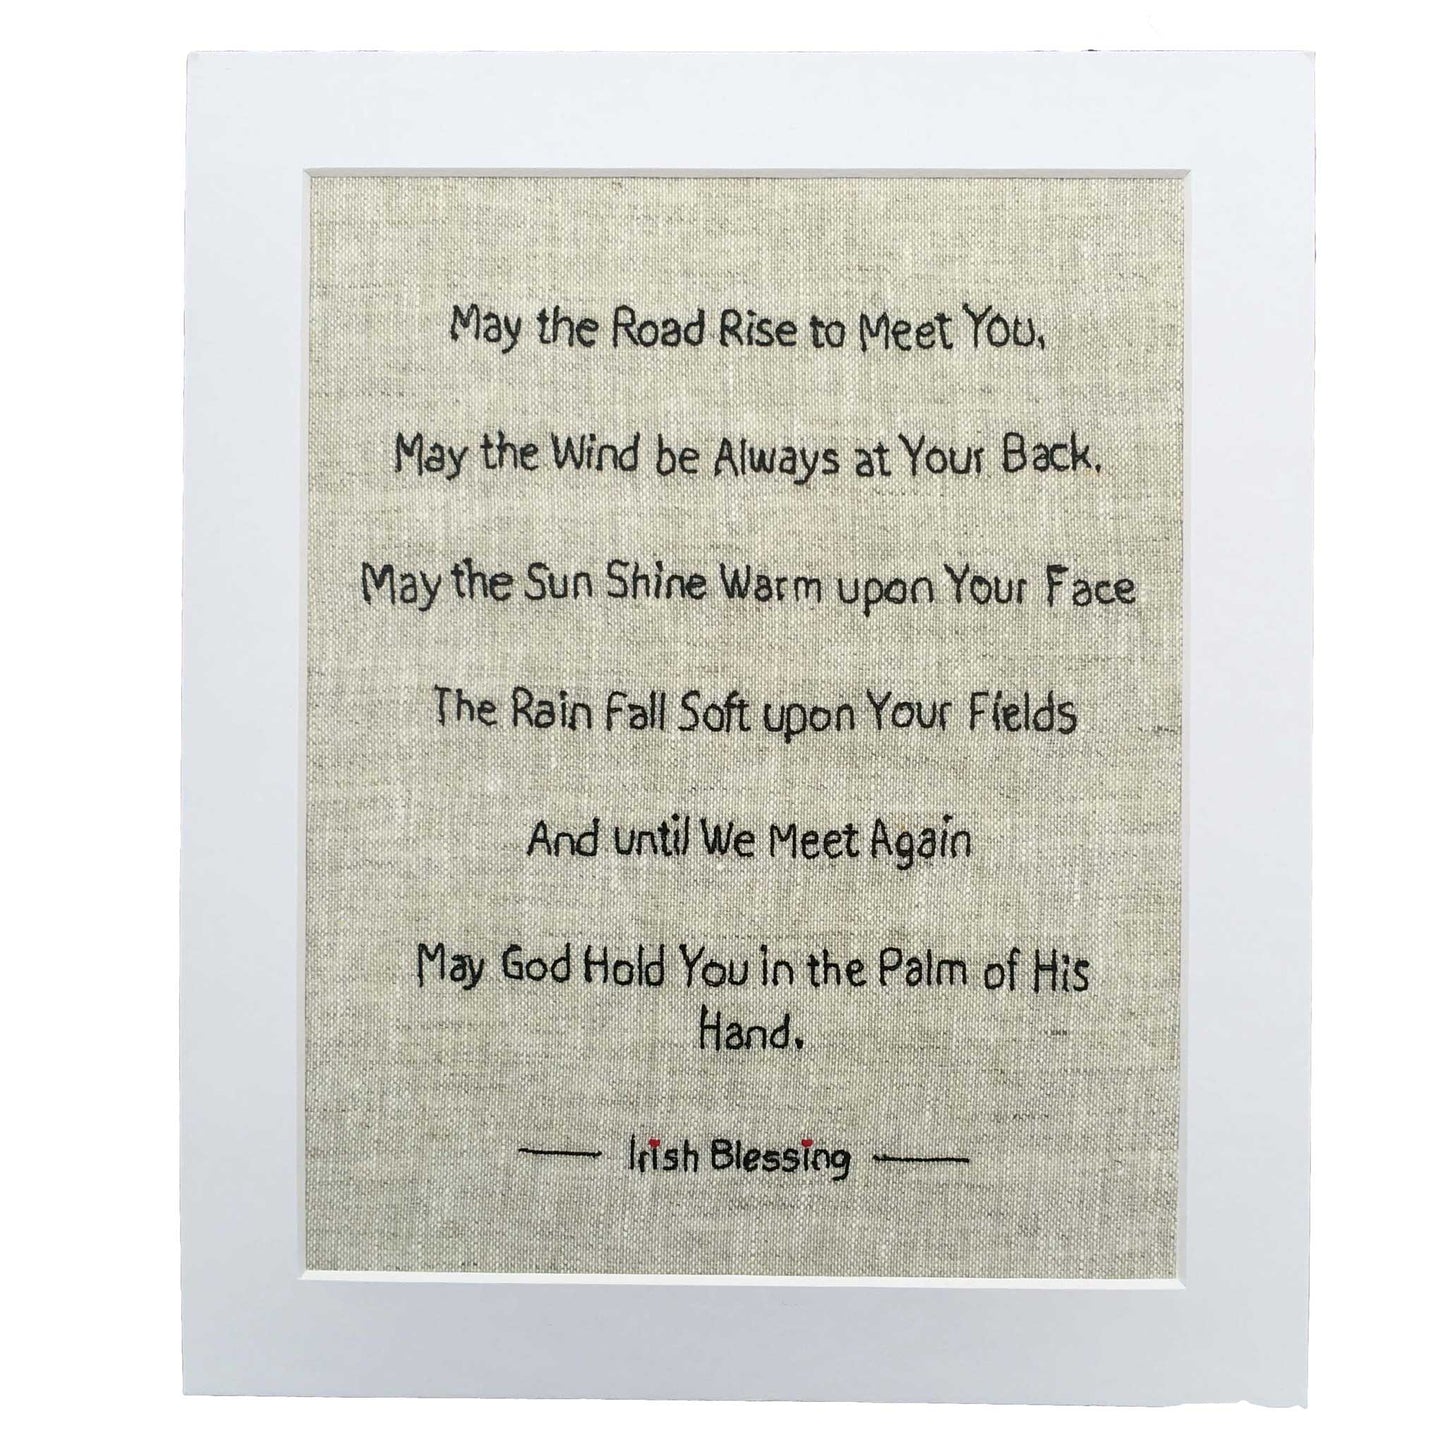 May the road rise to meet you famous irish blessing print